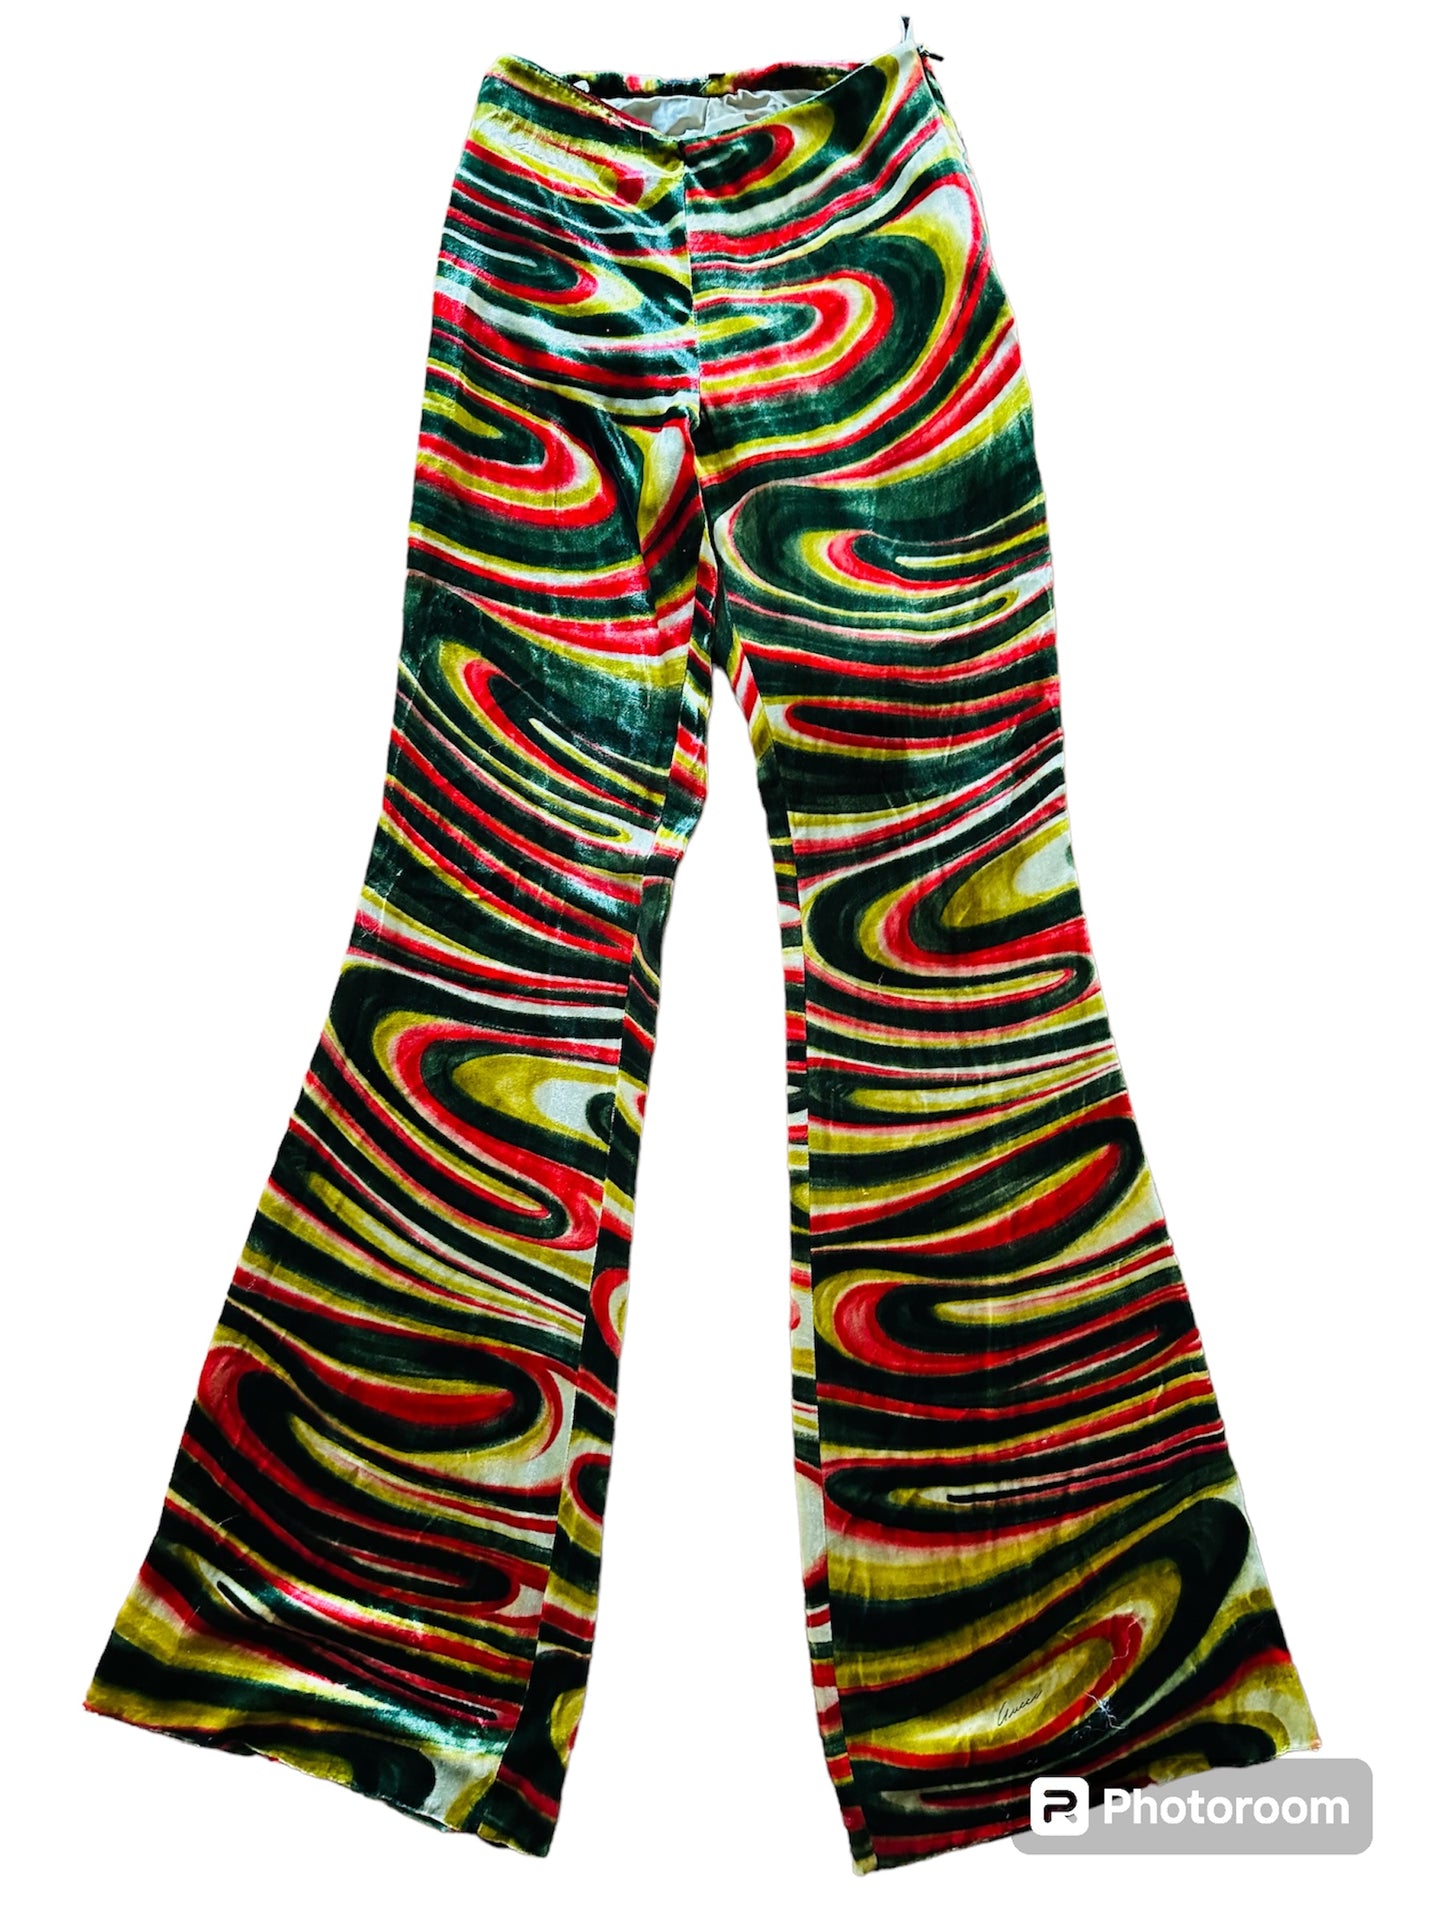 Gucci Tom Ford velvet pyschedelic pant trousers 1999 runway